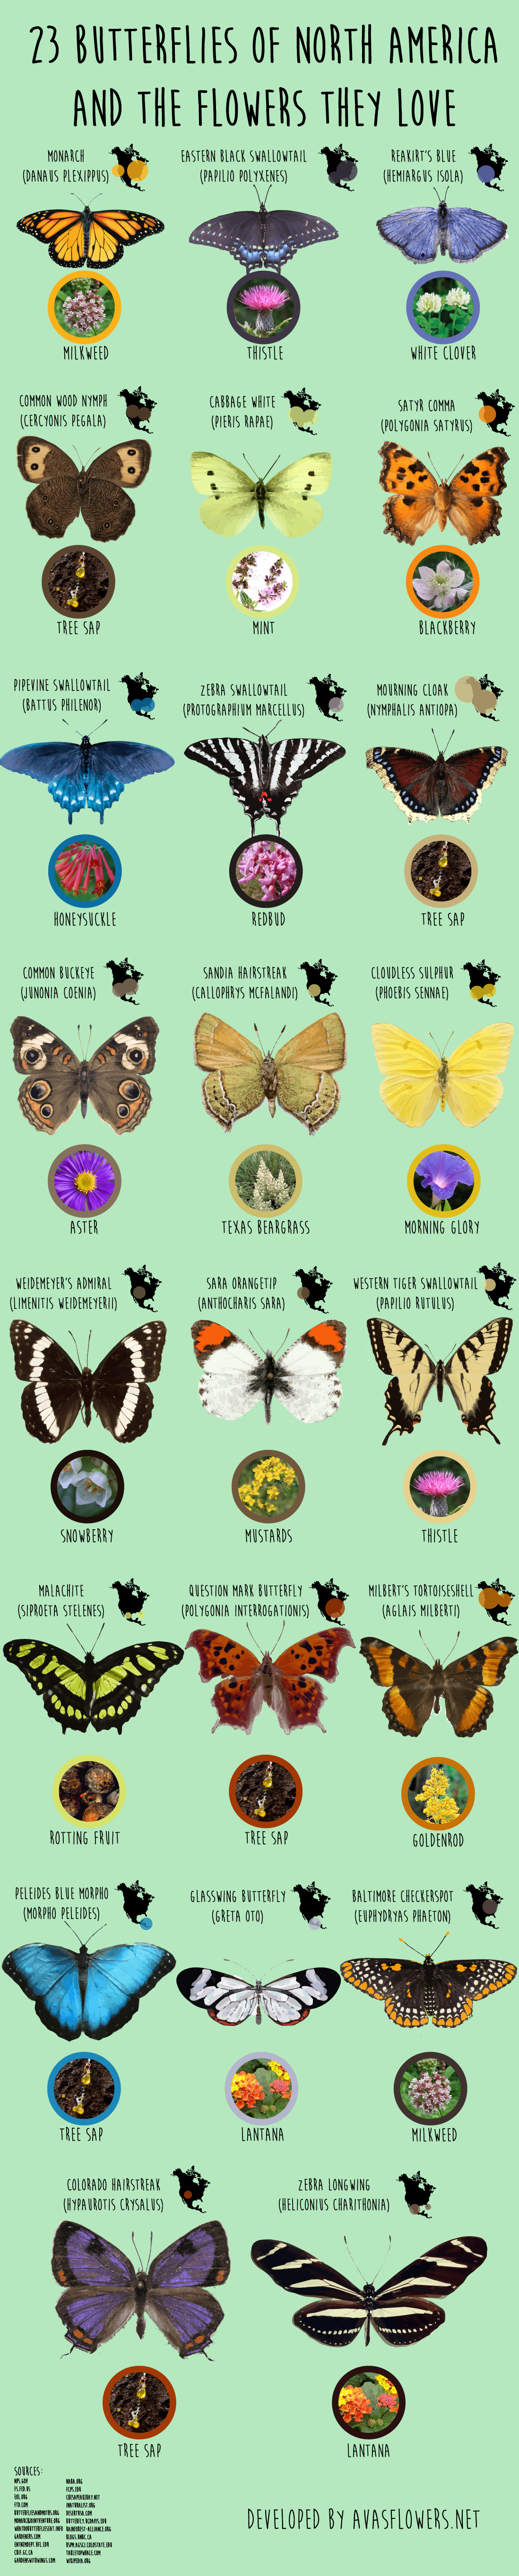 23 Butterflies of North America And the Flowers They Love - Avasflowers.net - Infographic